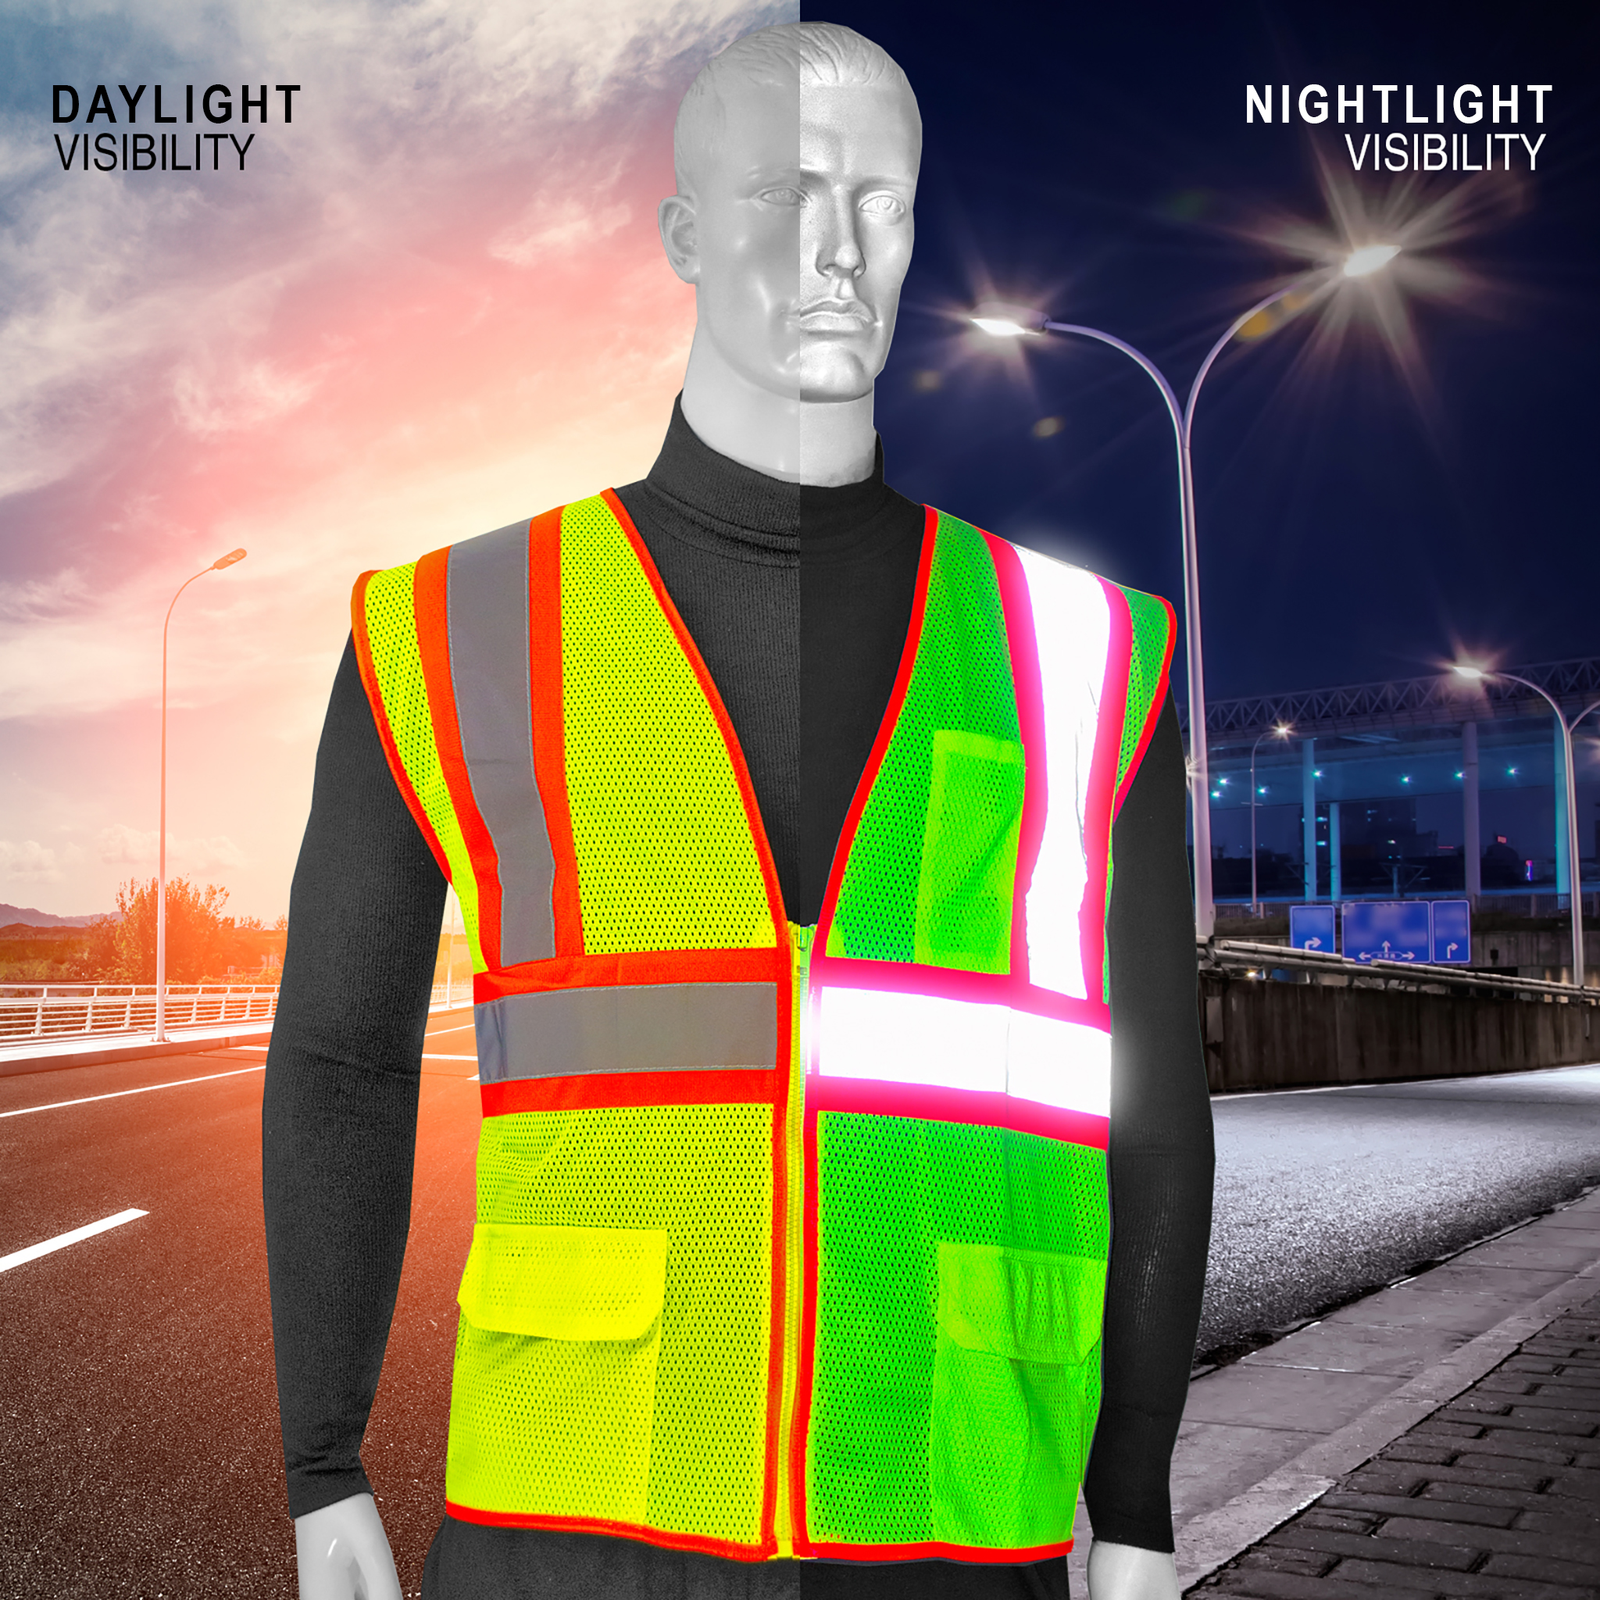 Mannequin wearing a printed hi vis safety vest comparing how bright it looks during day and night time